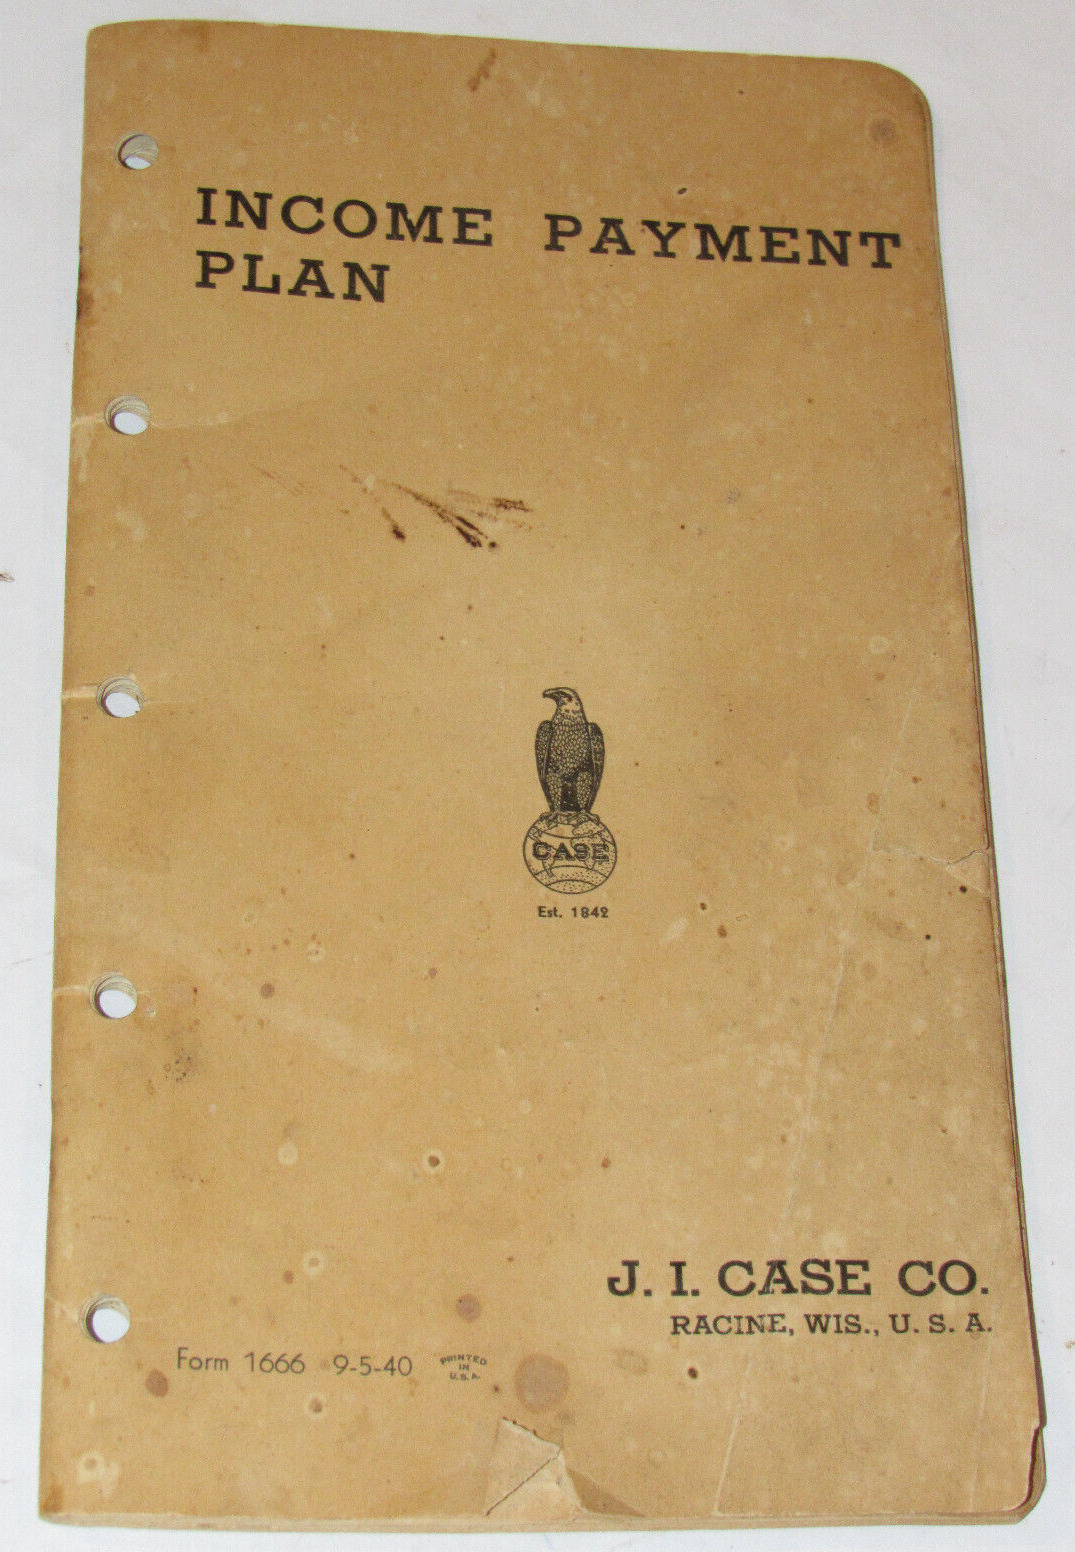 VINTAGE 1940 JI CASE \'INCOME PAYMENT PLAN\' BOOK BUY NEW & USED ON CASE CREDIT